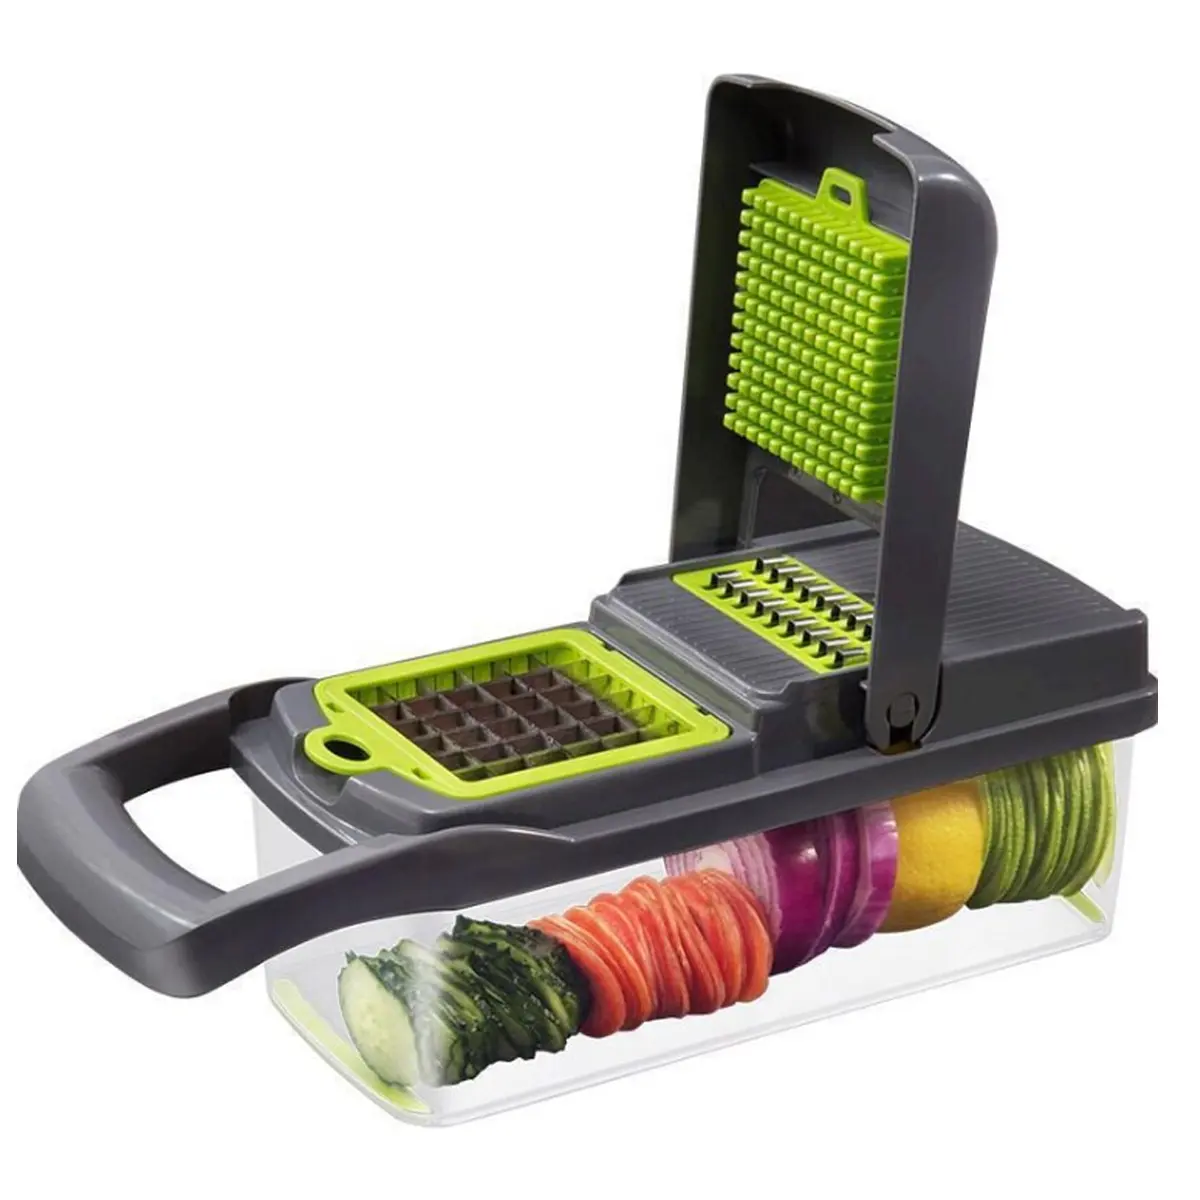 Kitchen accessories hot sell gadgets fruit and household Vegetable Chopper Slicer cutting tool manual Vegetable Cutter